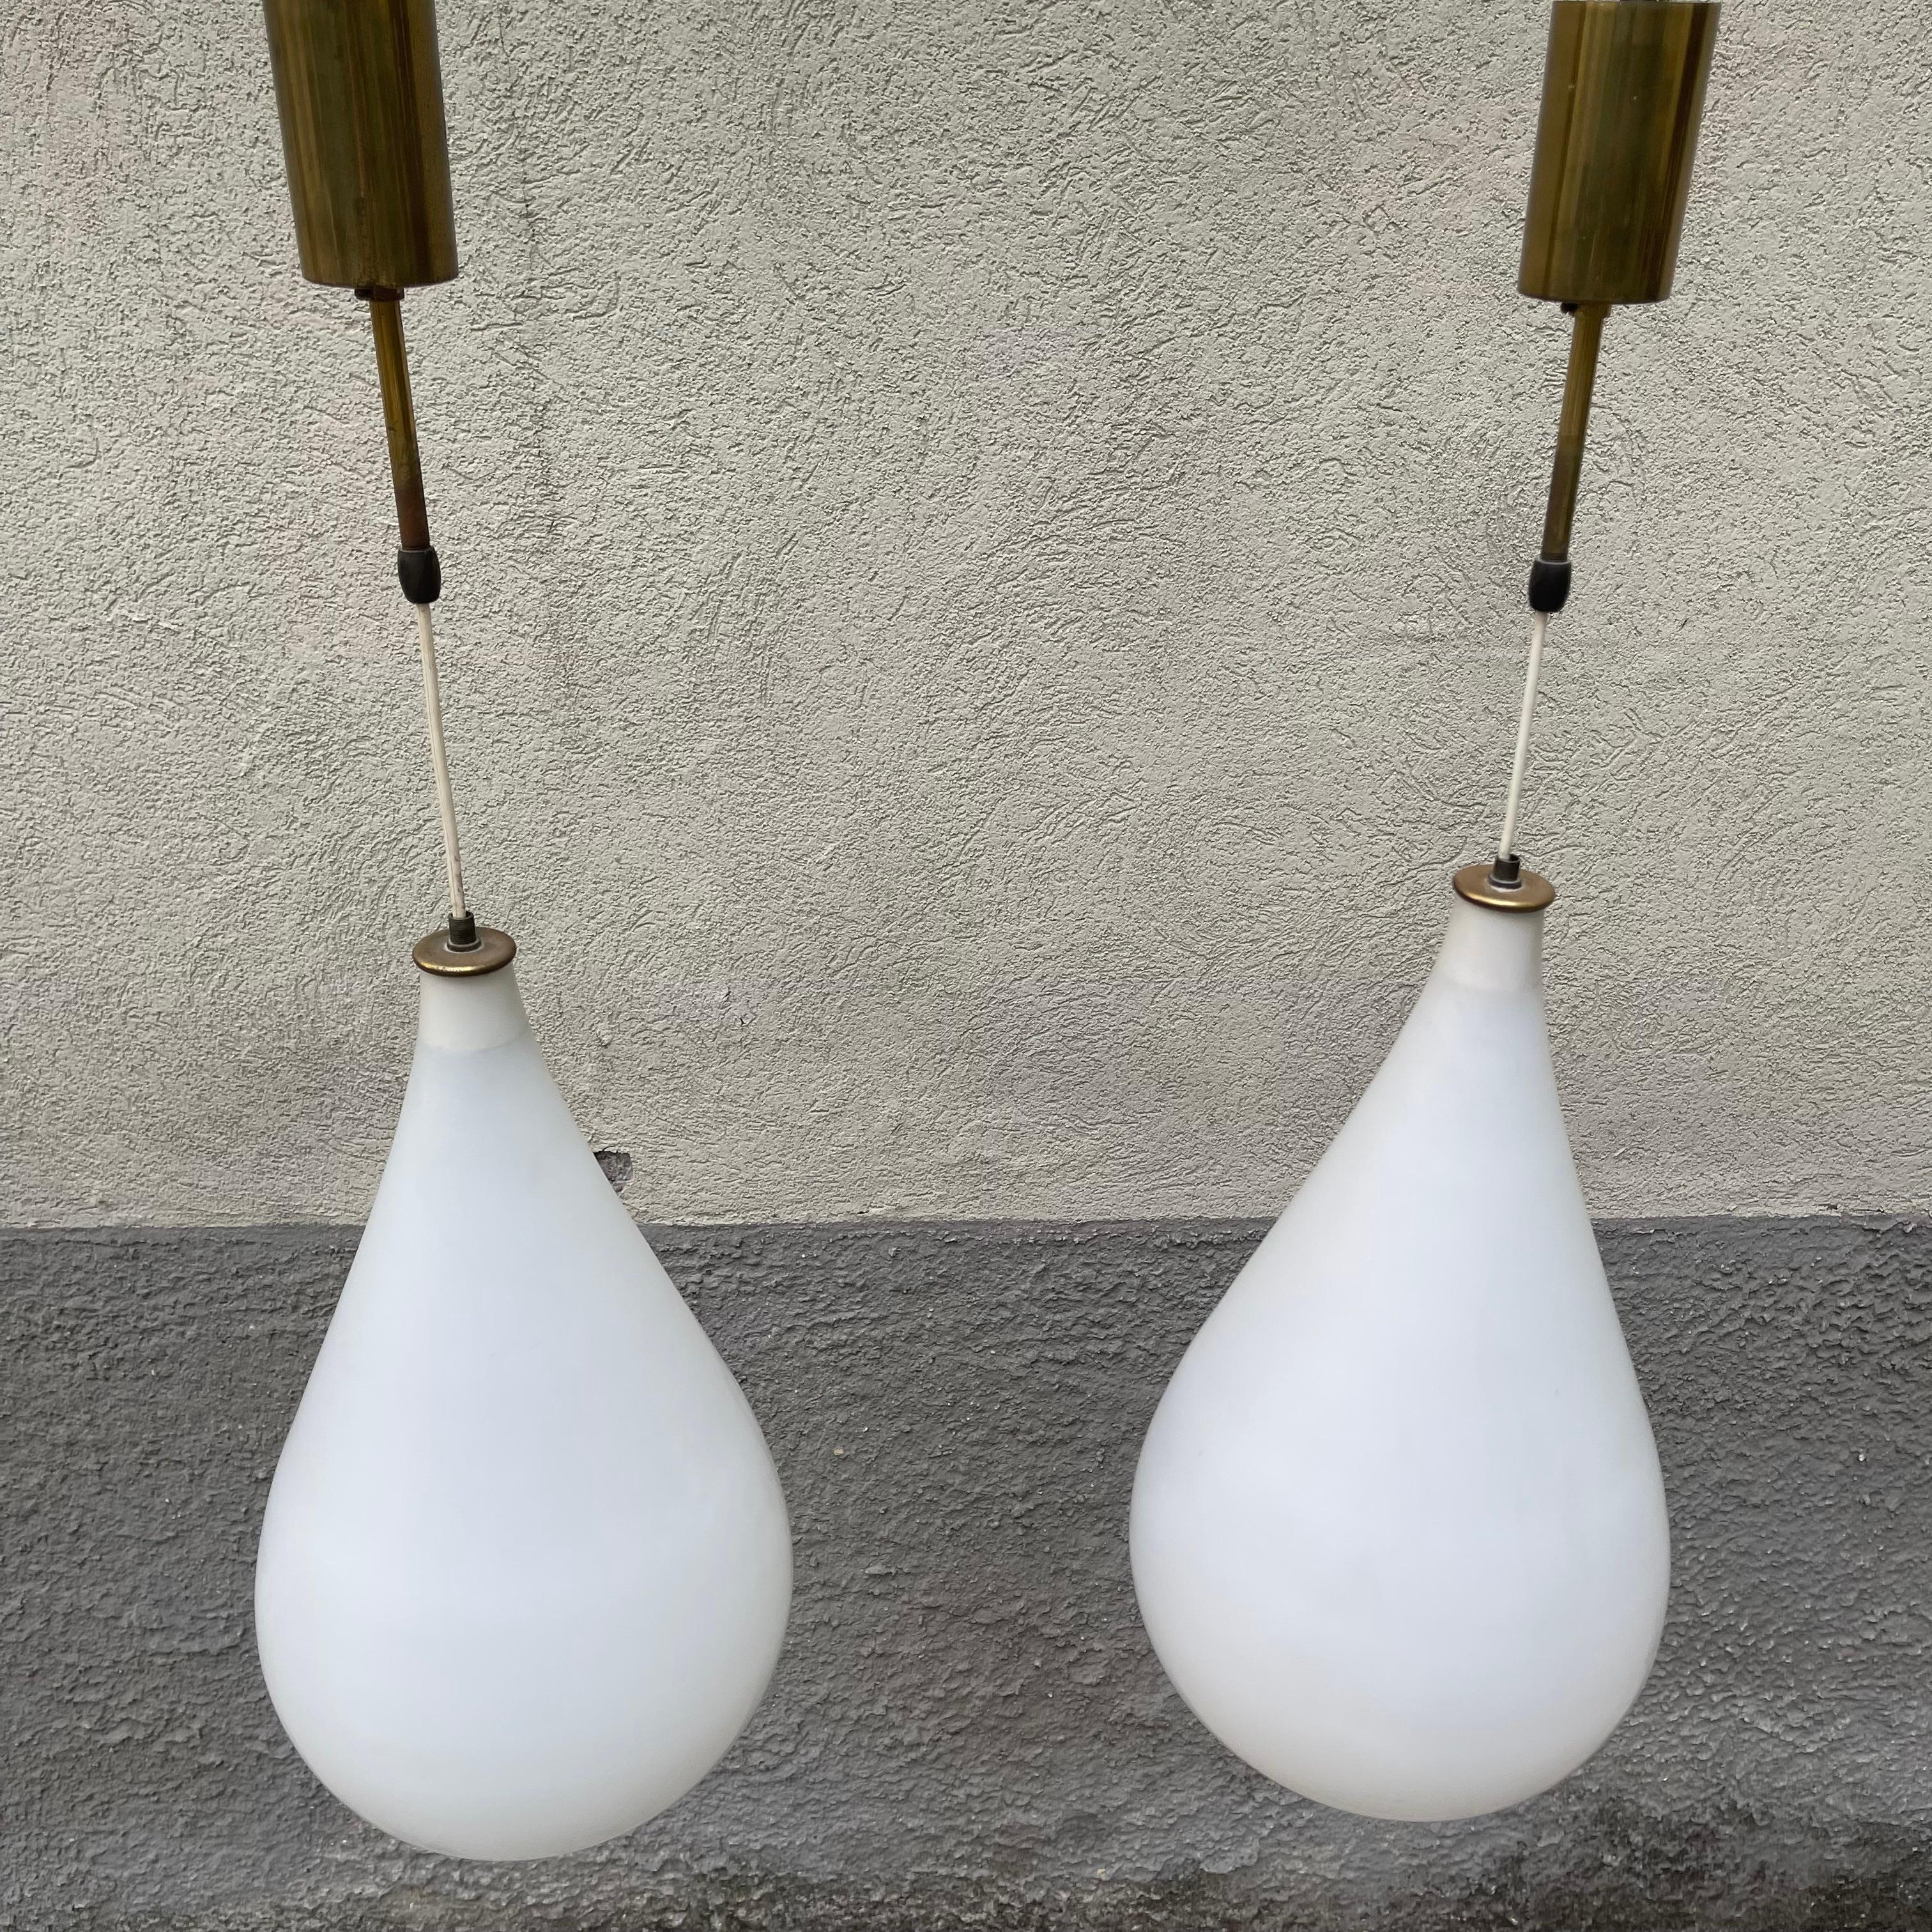 A frosted, mold-blown, Italian-made glass chandelier or pendant. A timeless tear-shaped piece in the style of Max Ingrand for Fontana Arte. The piece is elegantly blown in a sensual teardrop shape in frosted frosted glass. It is finished with solid